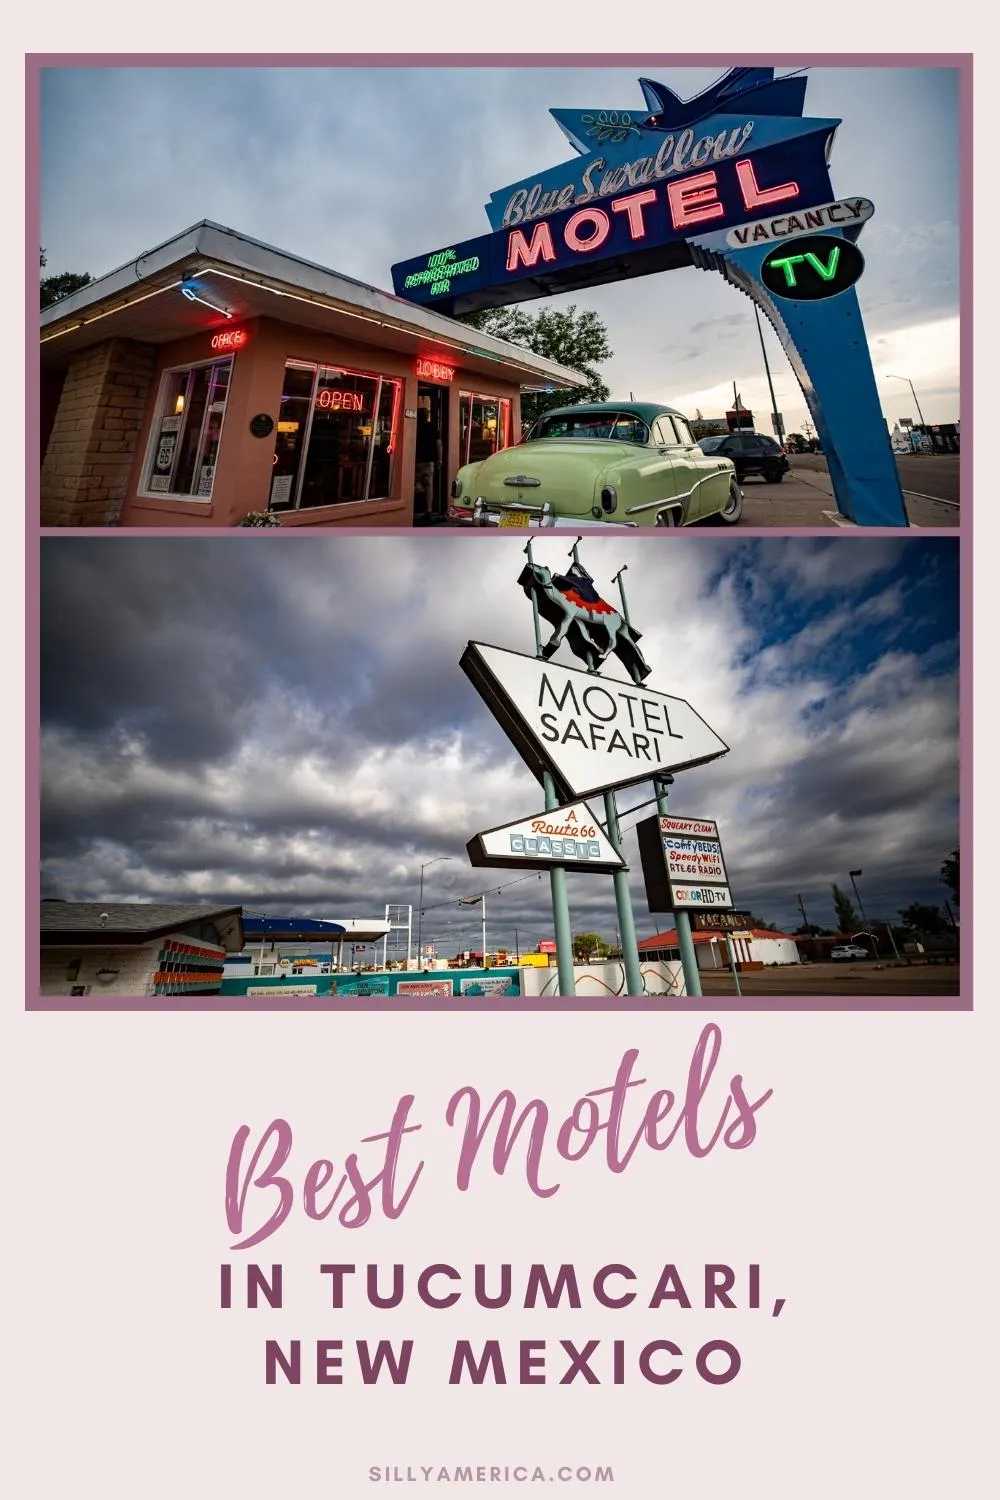 If you're taking a Route 66 road trip and looking for the best motels in Tucumcari, New Mexico, there are plenty of options to choose from. Whether you're looking for a historic Route 66 motel with vintage charm and a bright neon sign or a national chain hotel with a swimming pool and fitness center, you'll be sure to find the perfect place to stay in Tucumcari NM. #Route66 #Route66Motel #Route66Motels #Route66RoadTrip #NewMexicoRoute66 #NewMexico #NewMexicoRoarTrip #TucumcariNewMexico